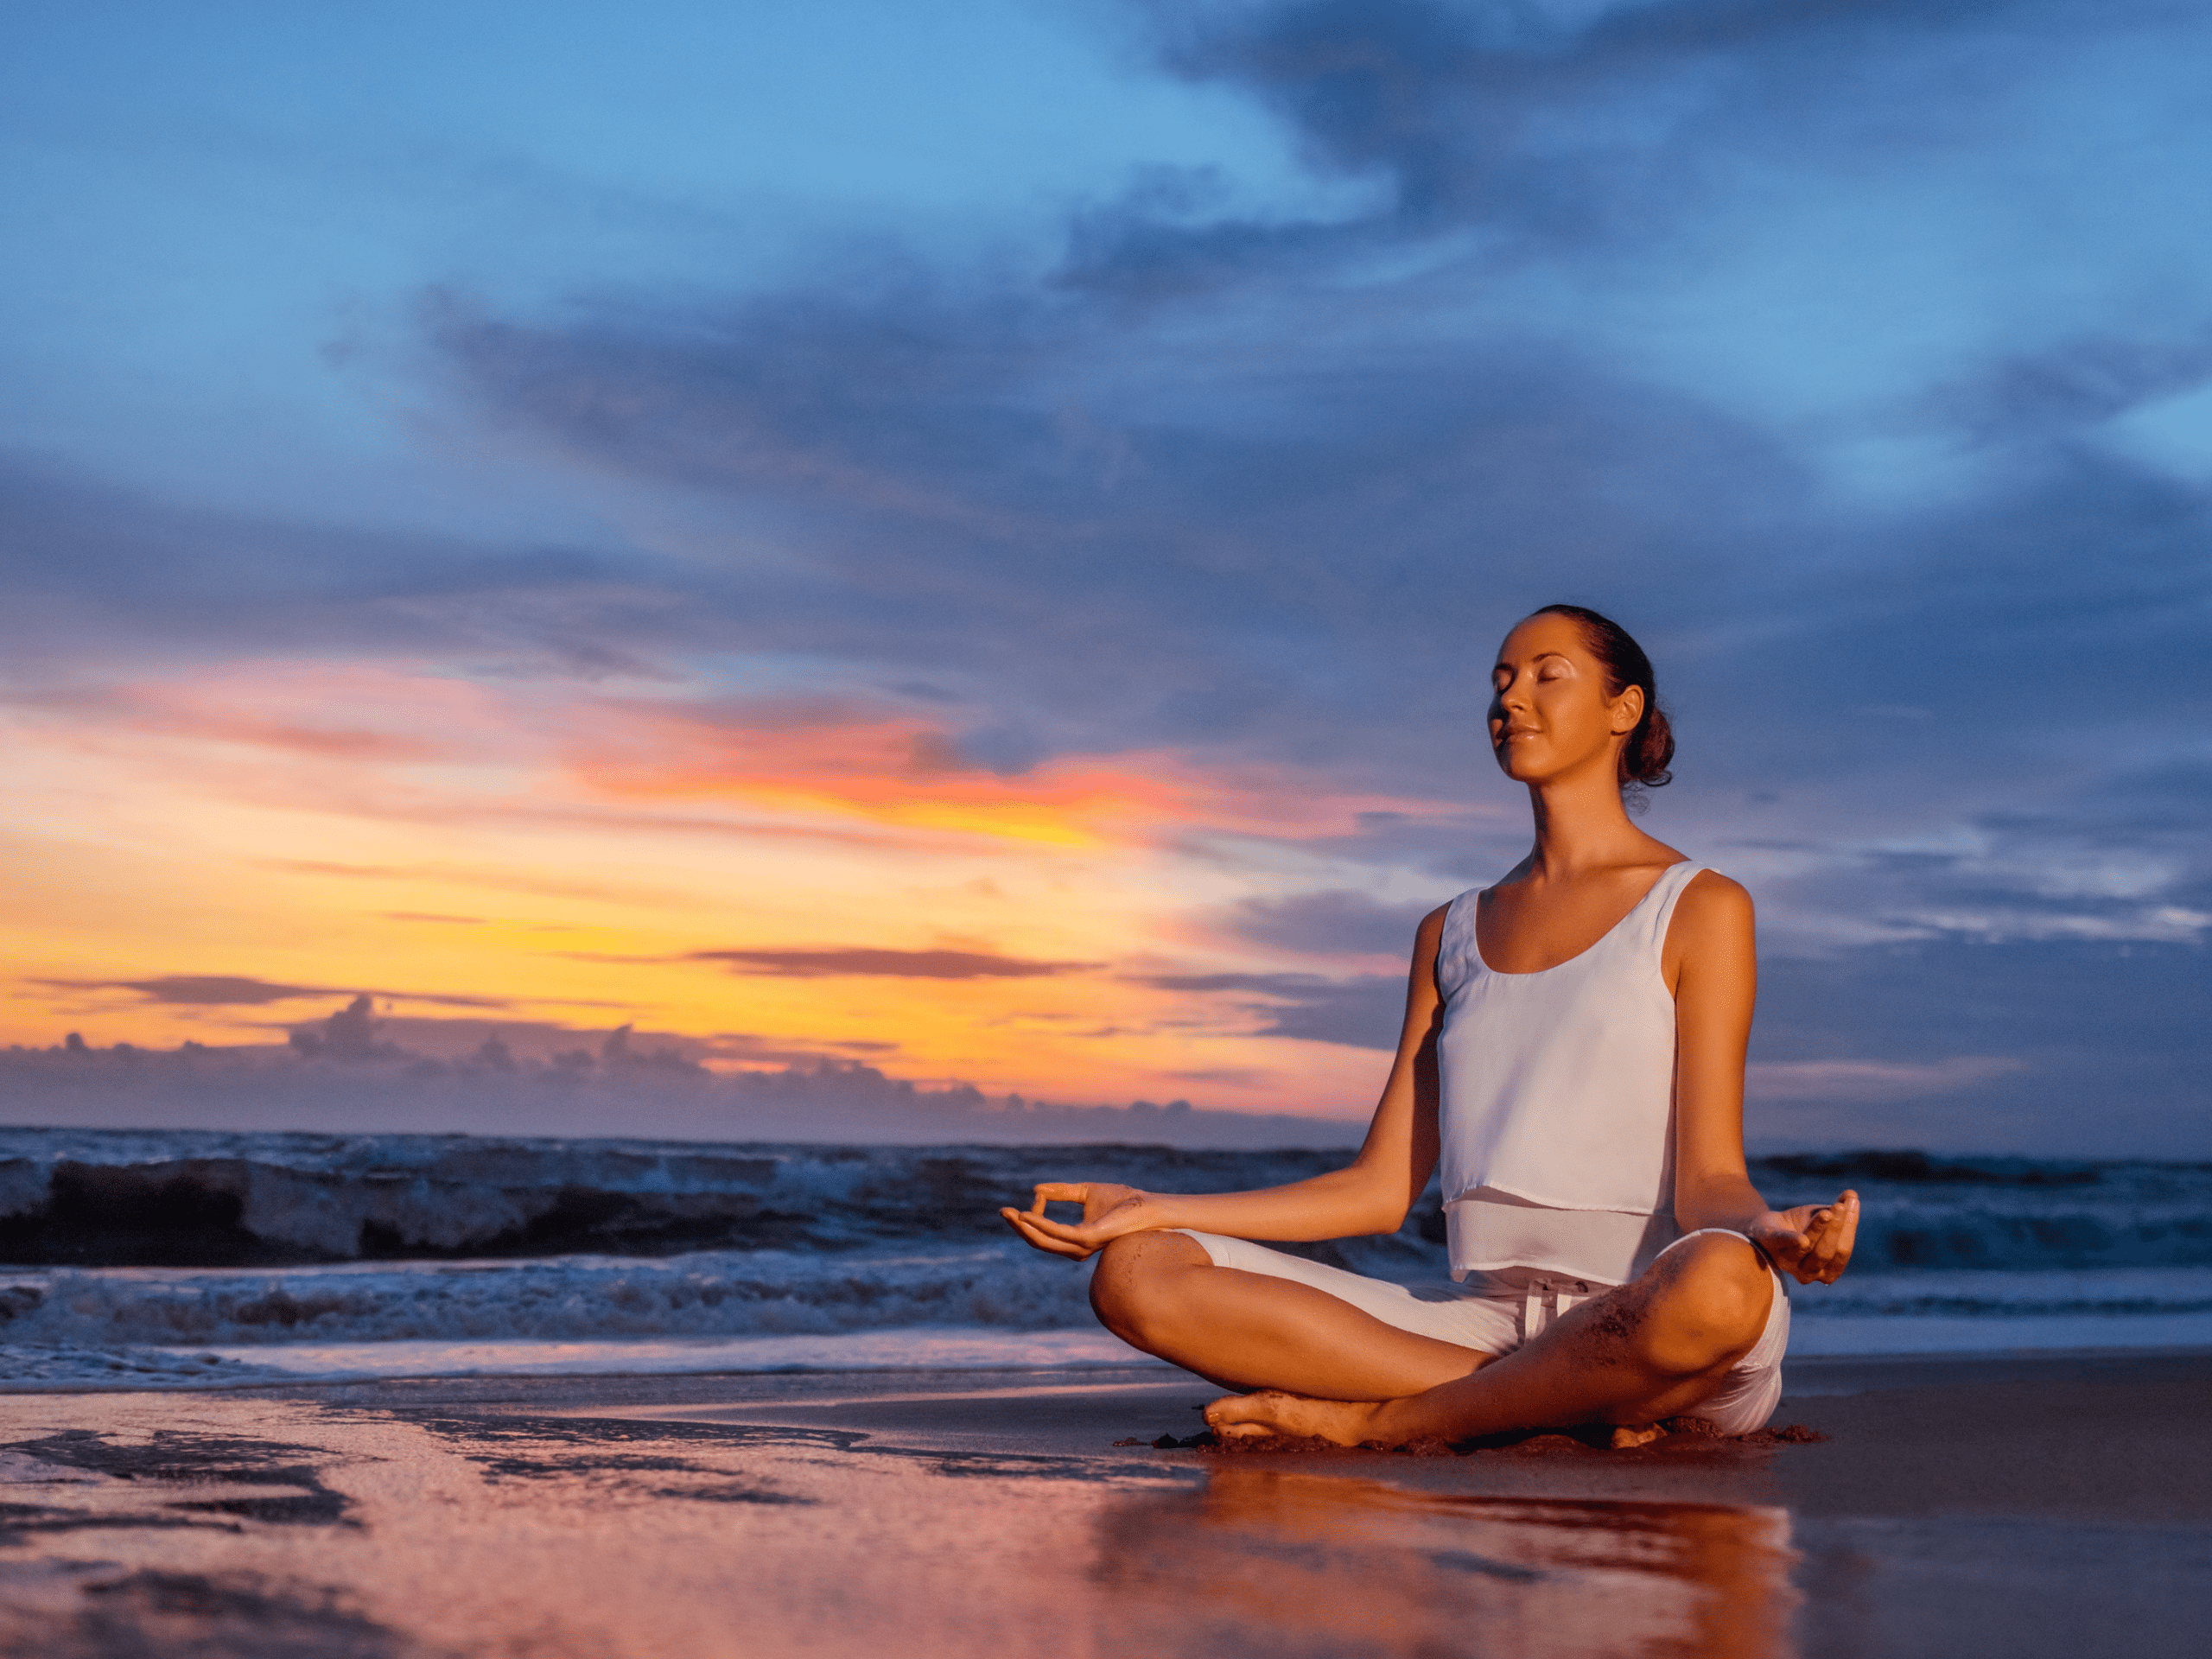 a woman meditating and relaxing at the beach